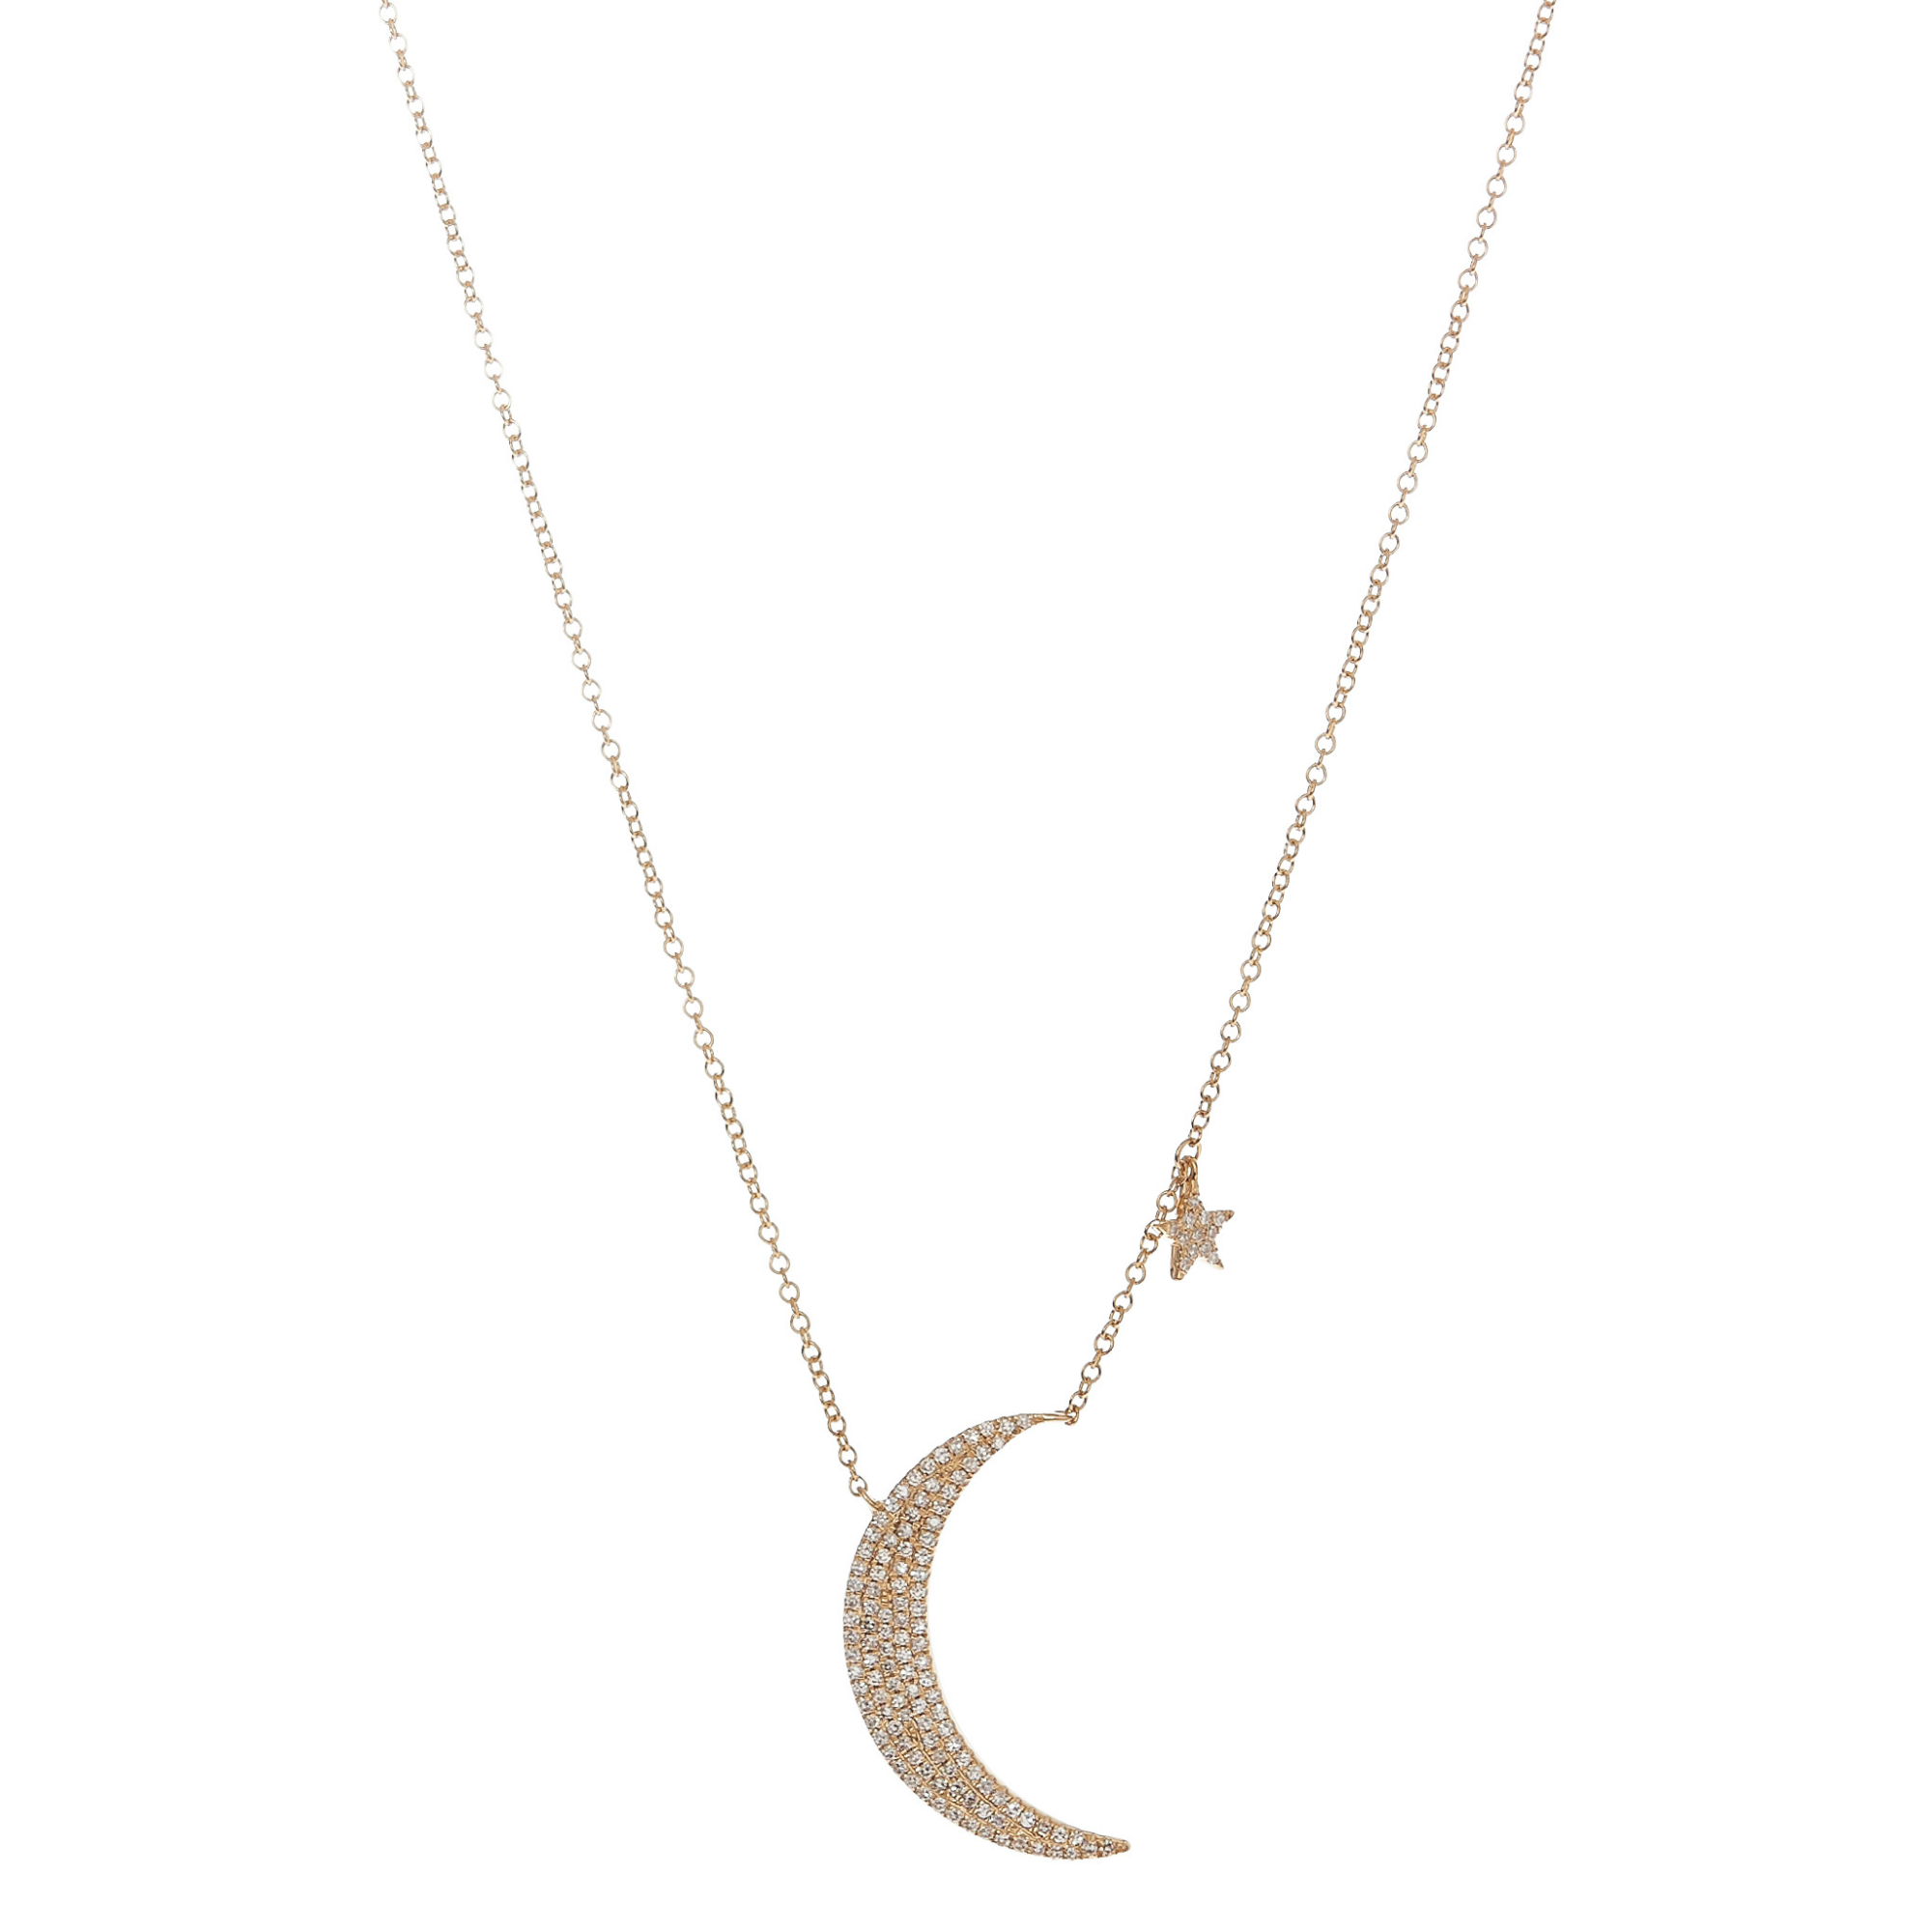 18K Gold Plated Crescent Moon & Movable Shiny Crystal Star Pendant Necklace  | eBay